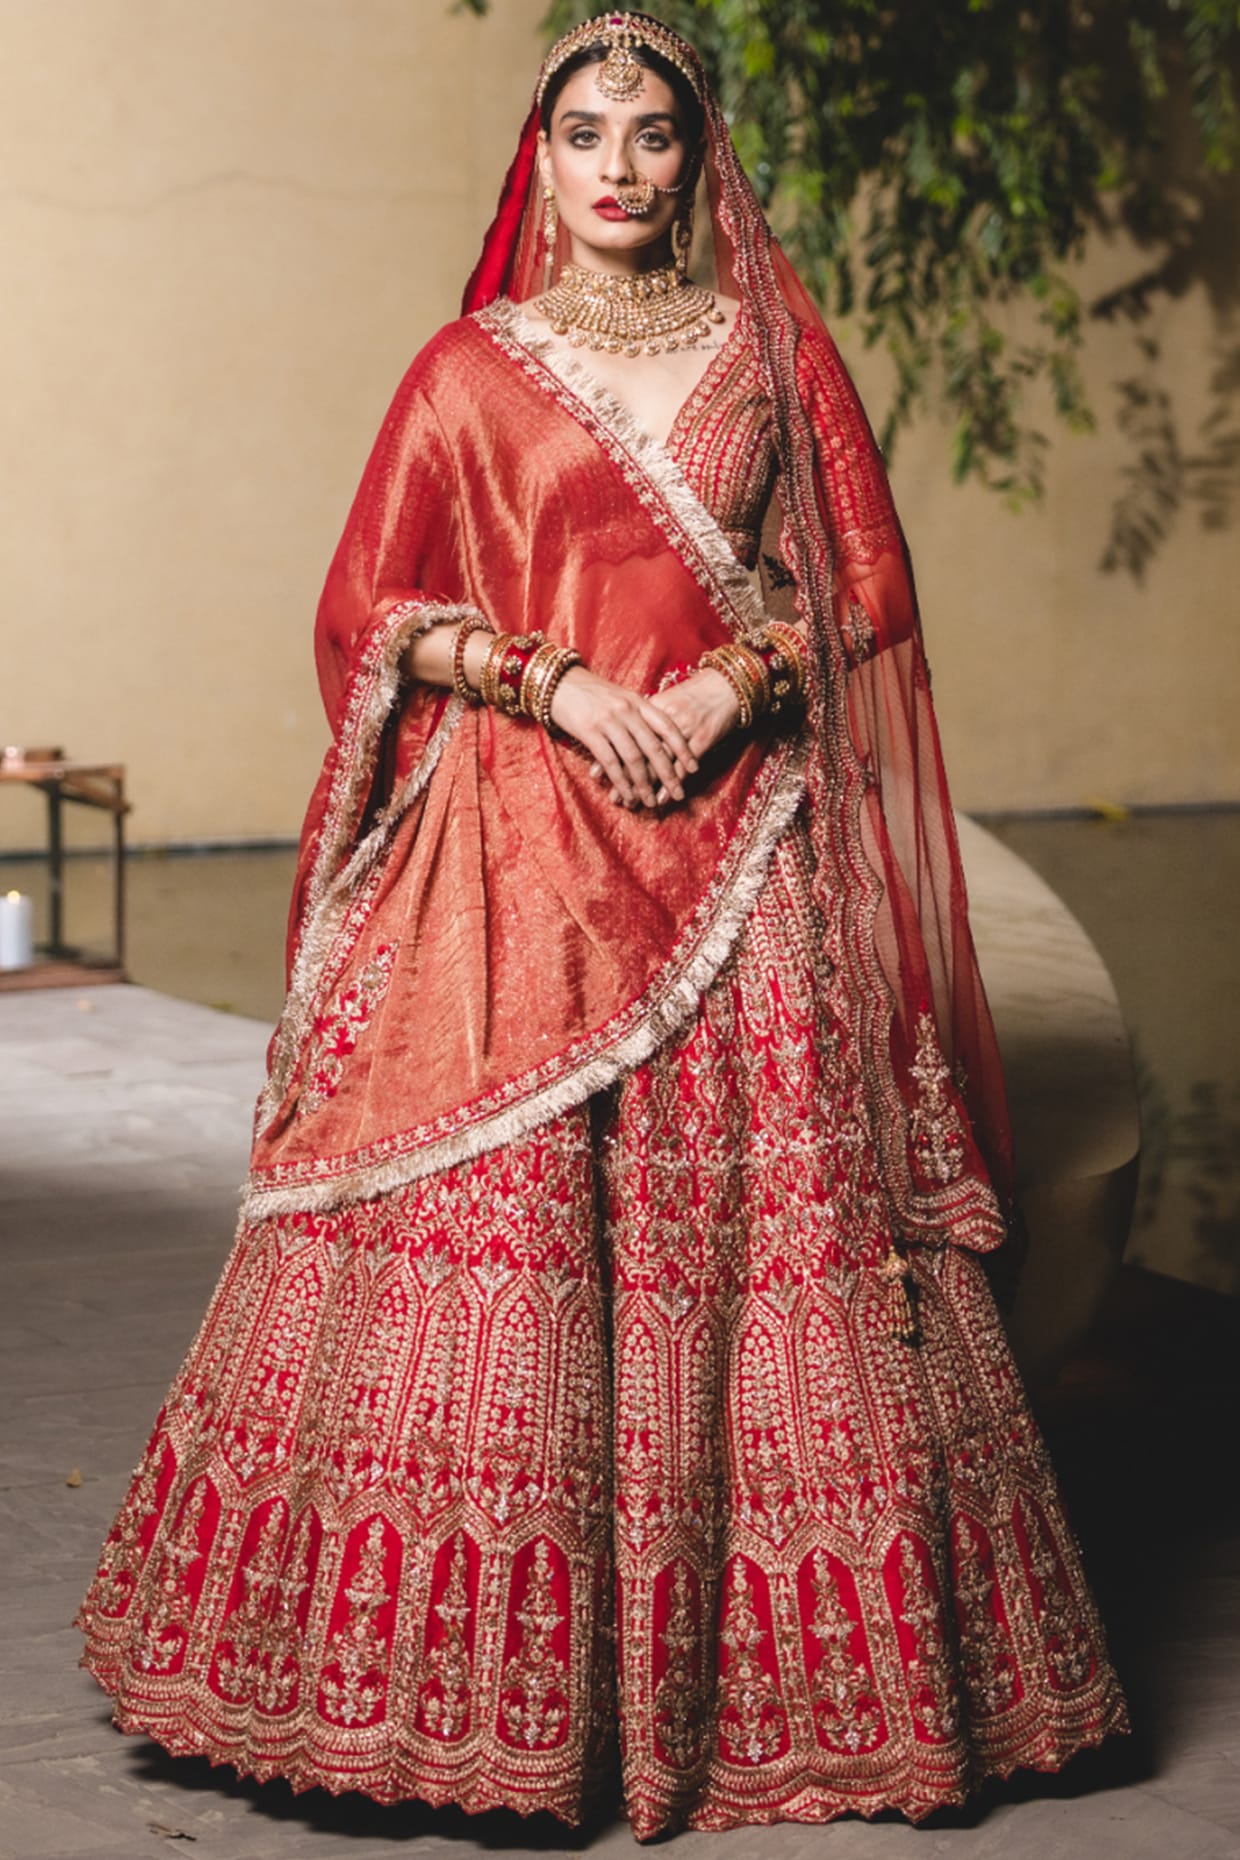 HSY | Red Bridal Dresses - Stunning Styles